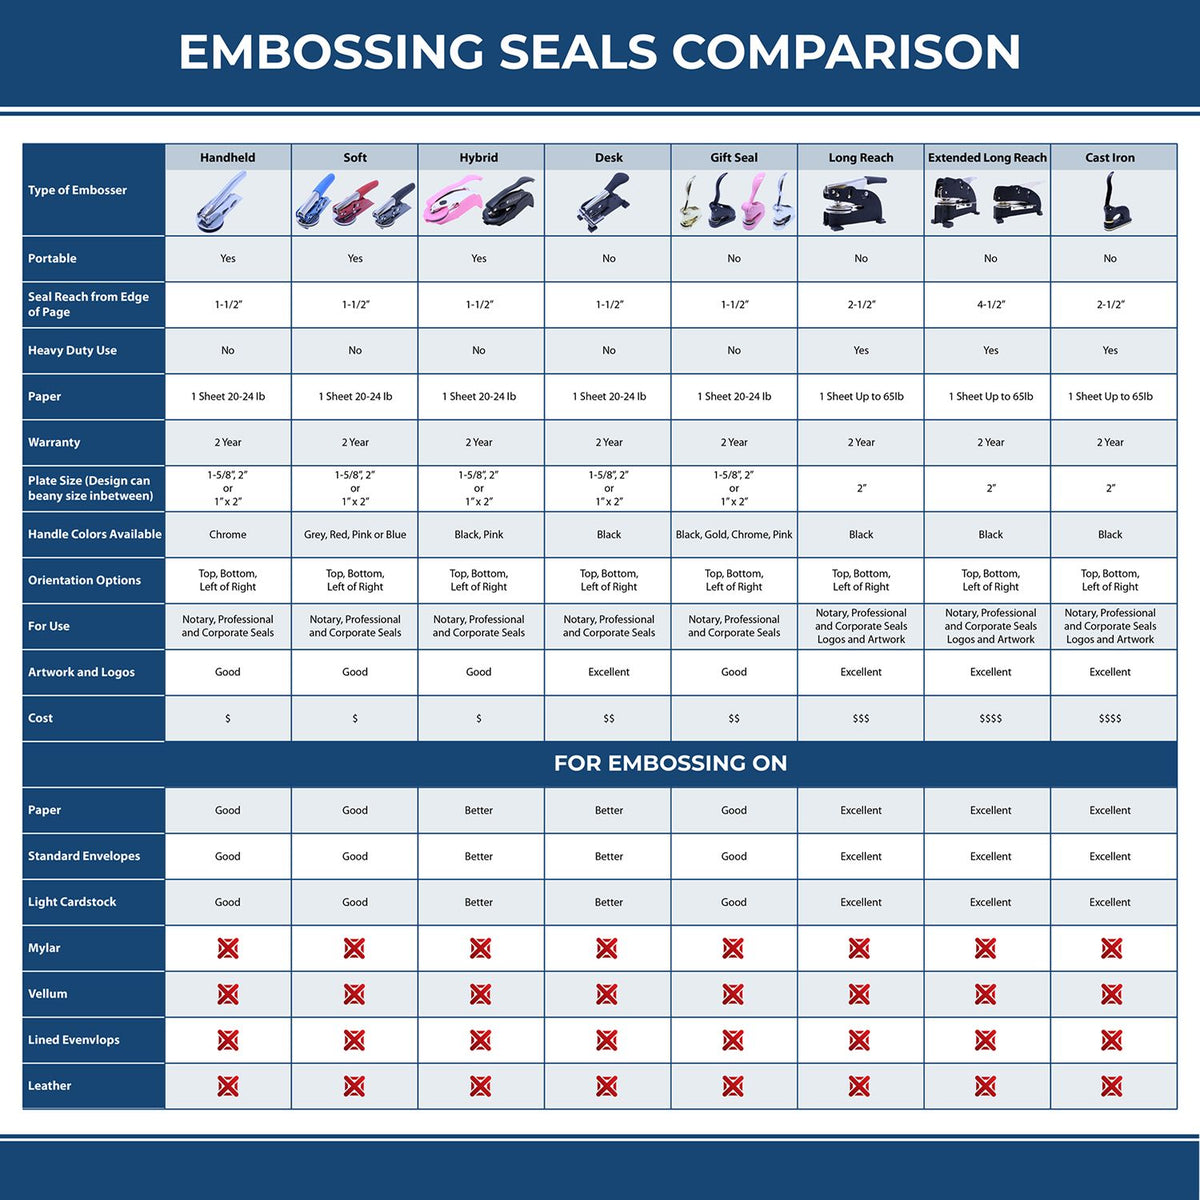 A comparison chart for the different types of mount models available for the Hybrid Kansas Engineer Seal